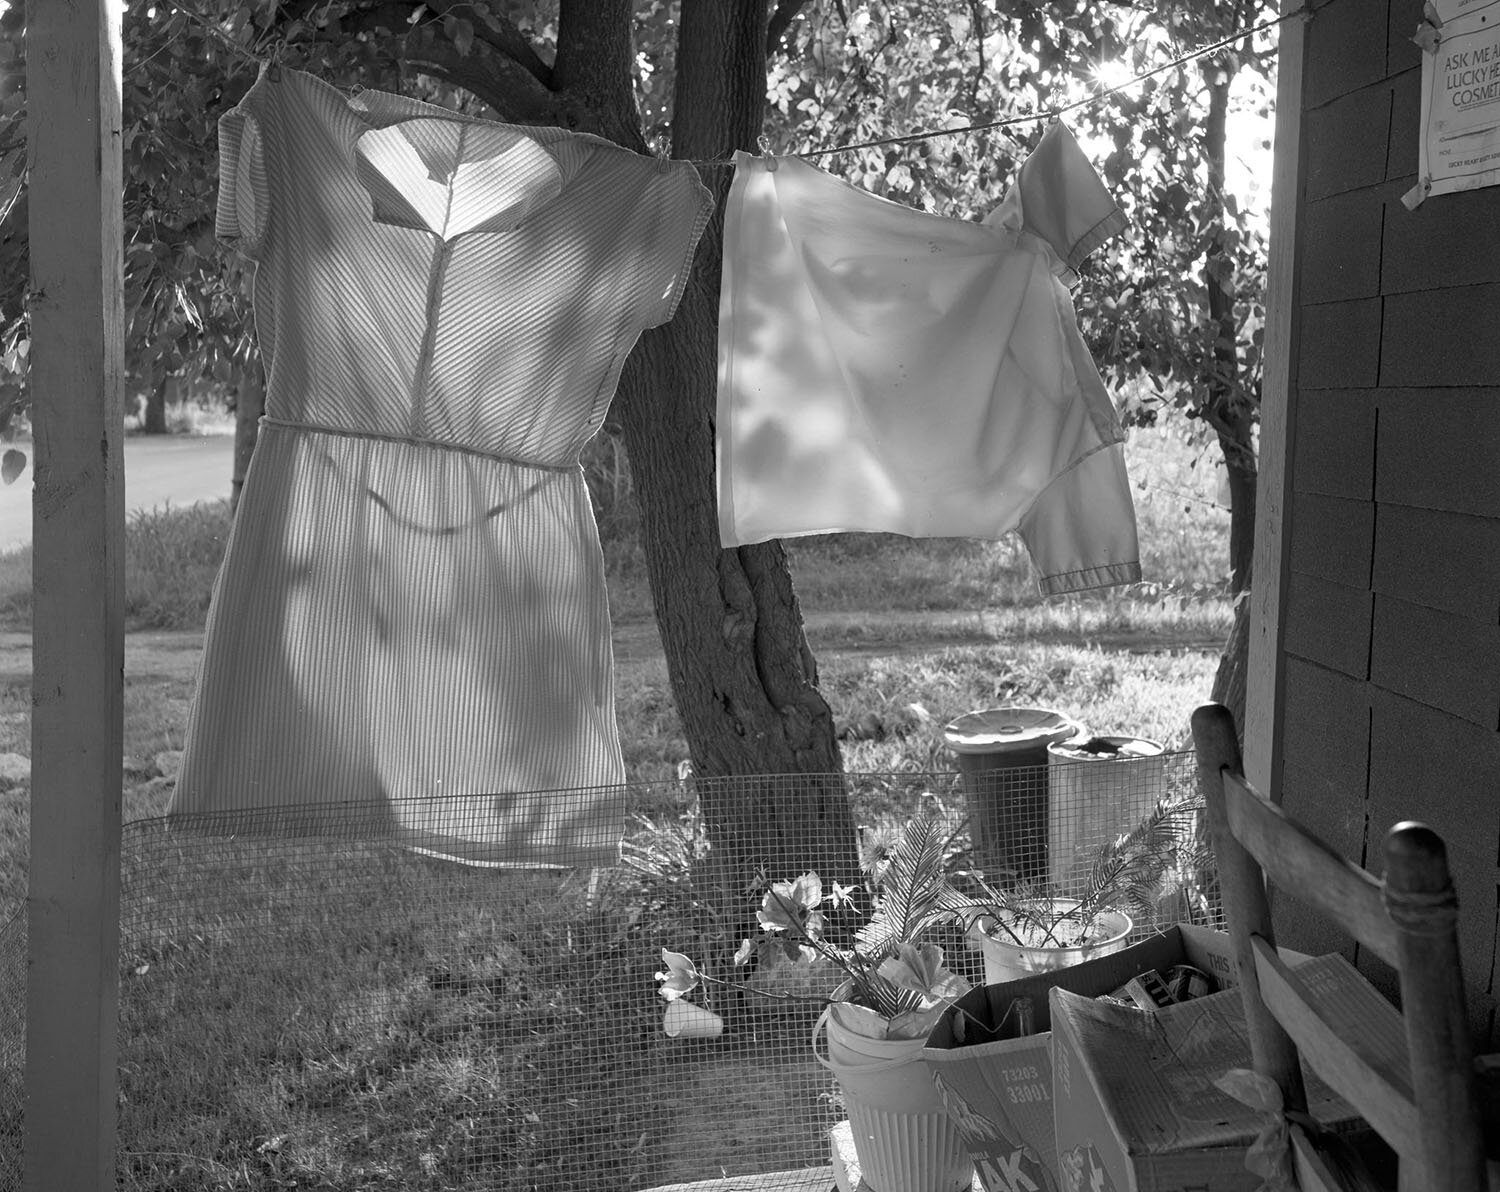   Maid’s Dresses, Helena, AR , 1985 Archival pigment print  15 × 19 in. (image size) The Do Good Fund, Inc., 2016-29 